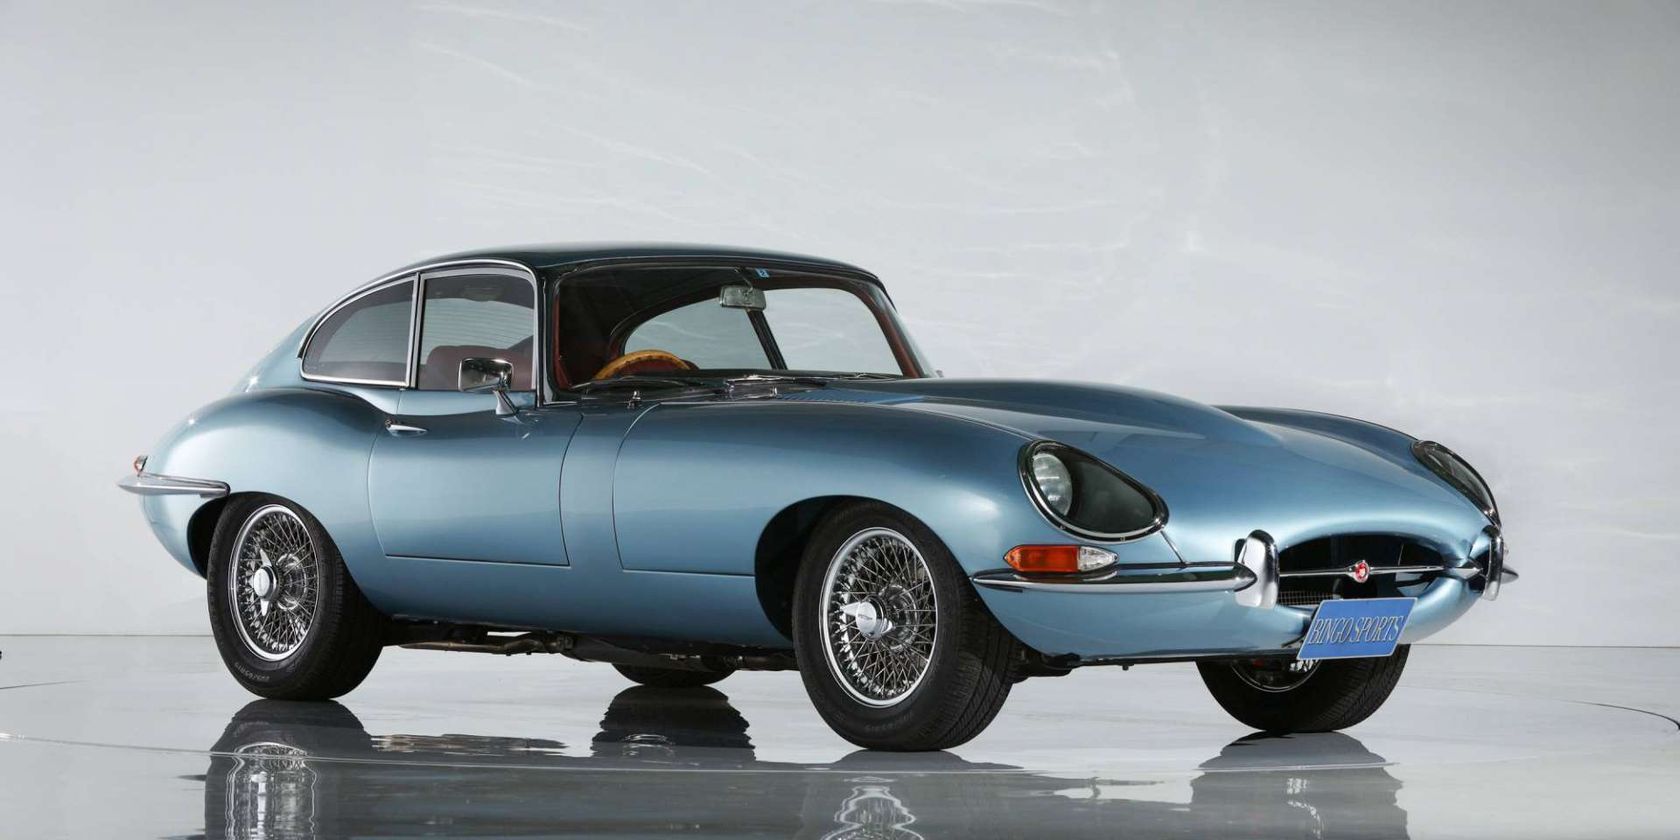 1966 Jaguar E-type Series 1 4.2 Liter Coupe for sale on Luxify